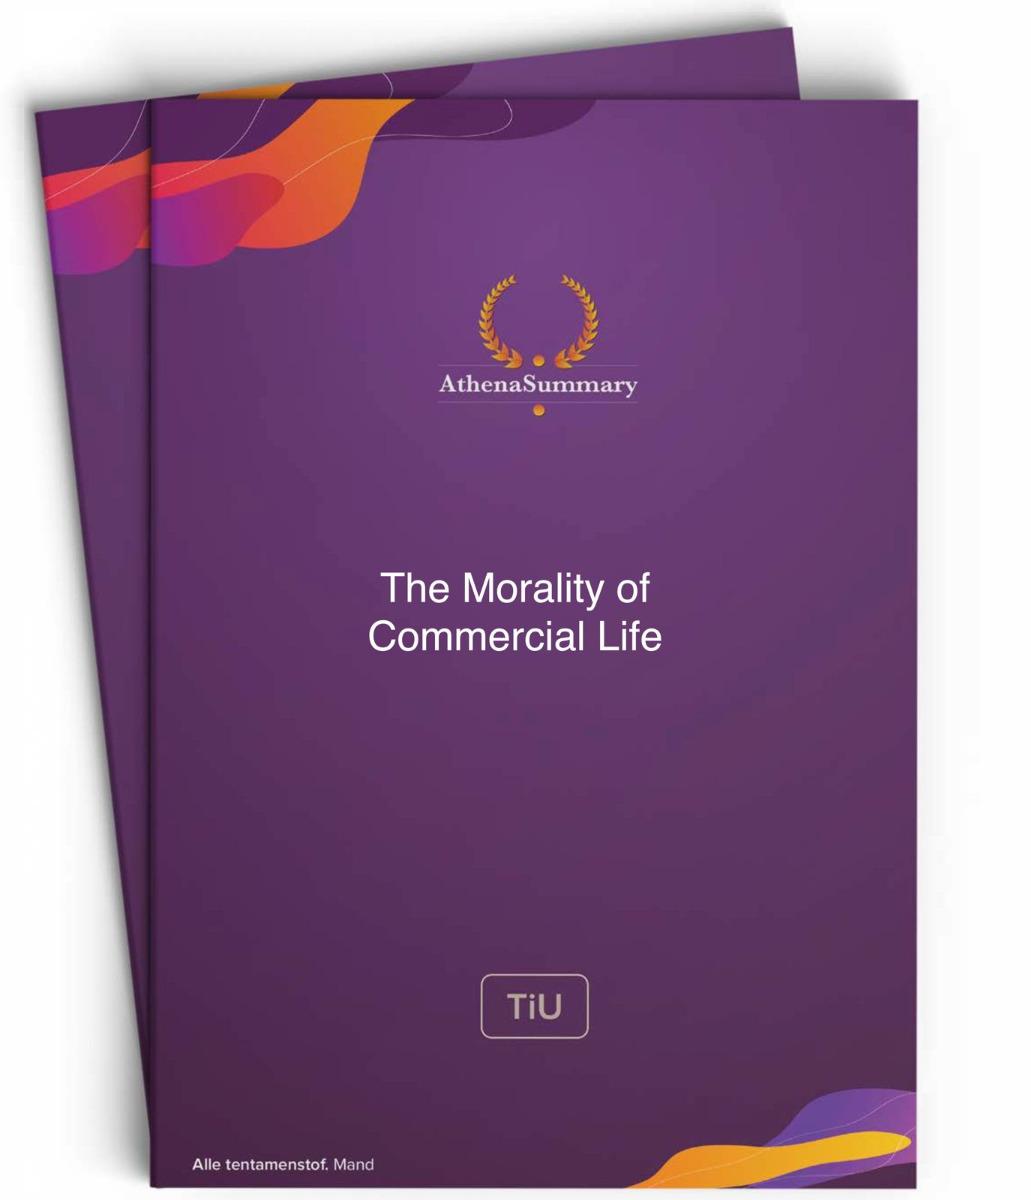 Literature and Lecture Summary: The Morality of Commercial Life